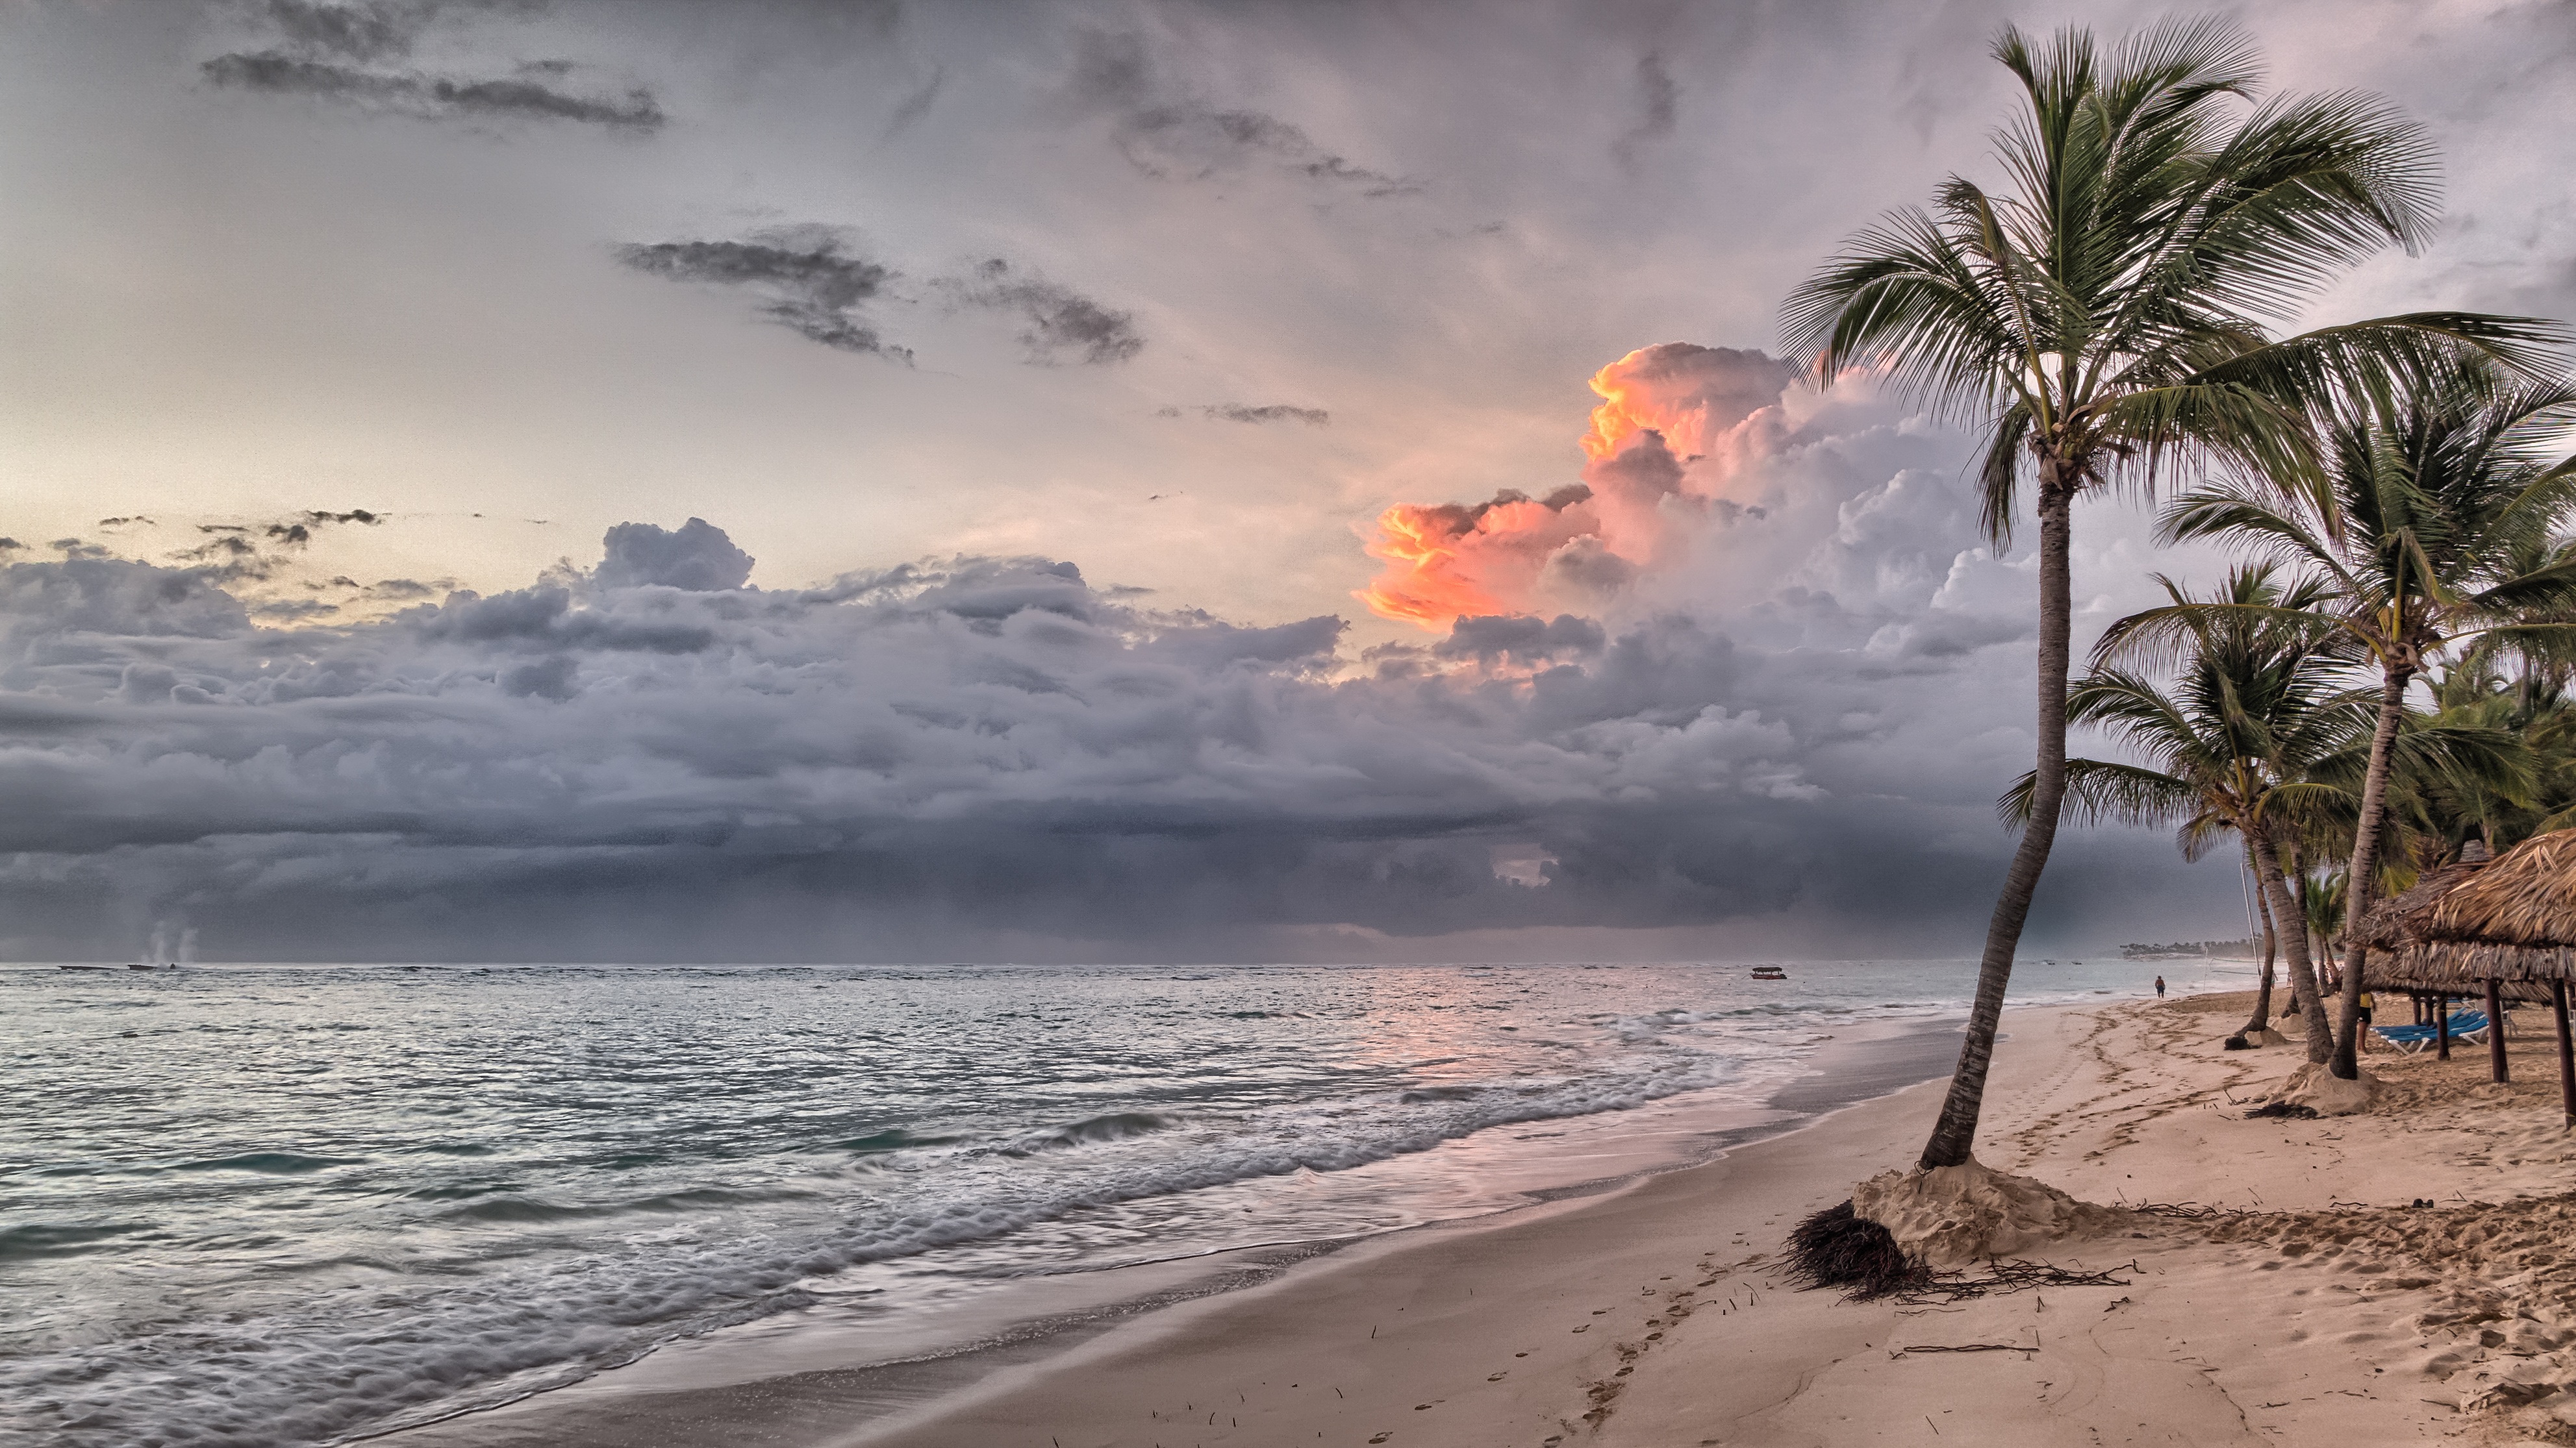 Free photo Thunderclouds approaching a sandy beach with palm trees